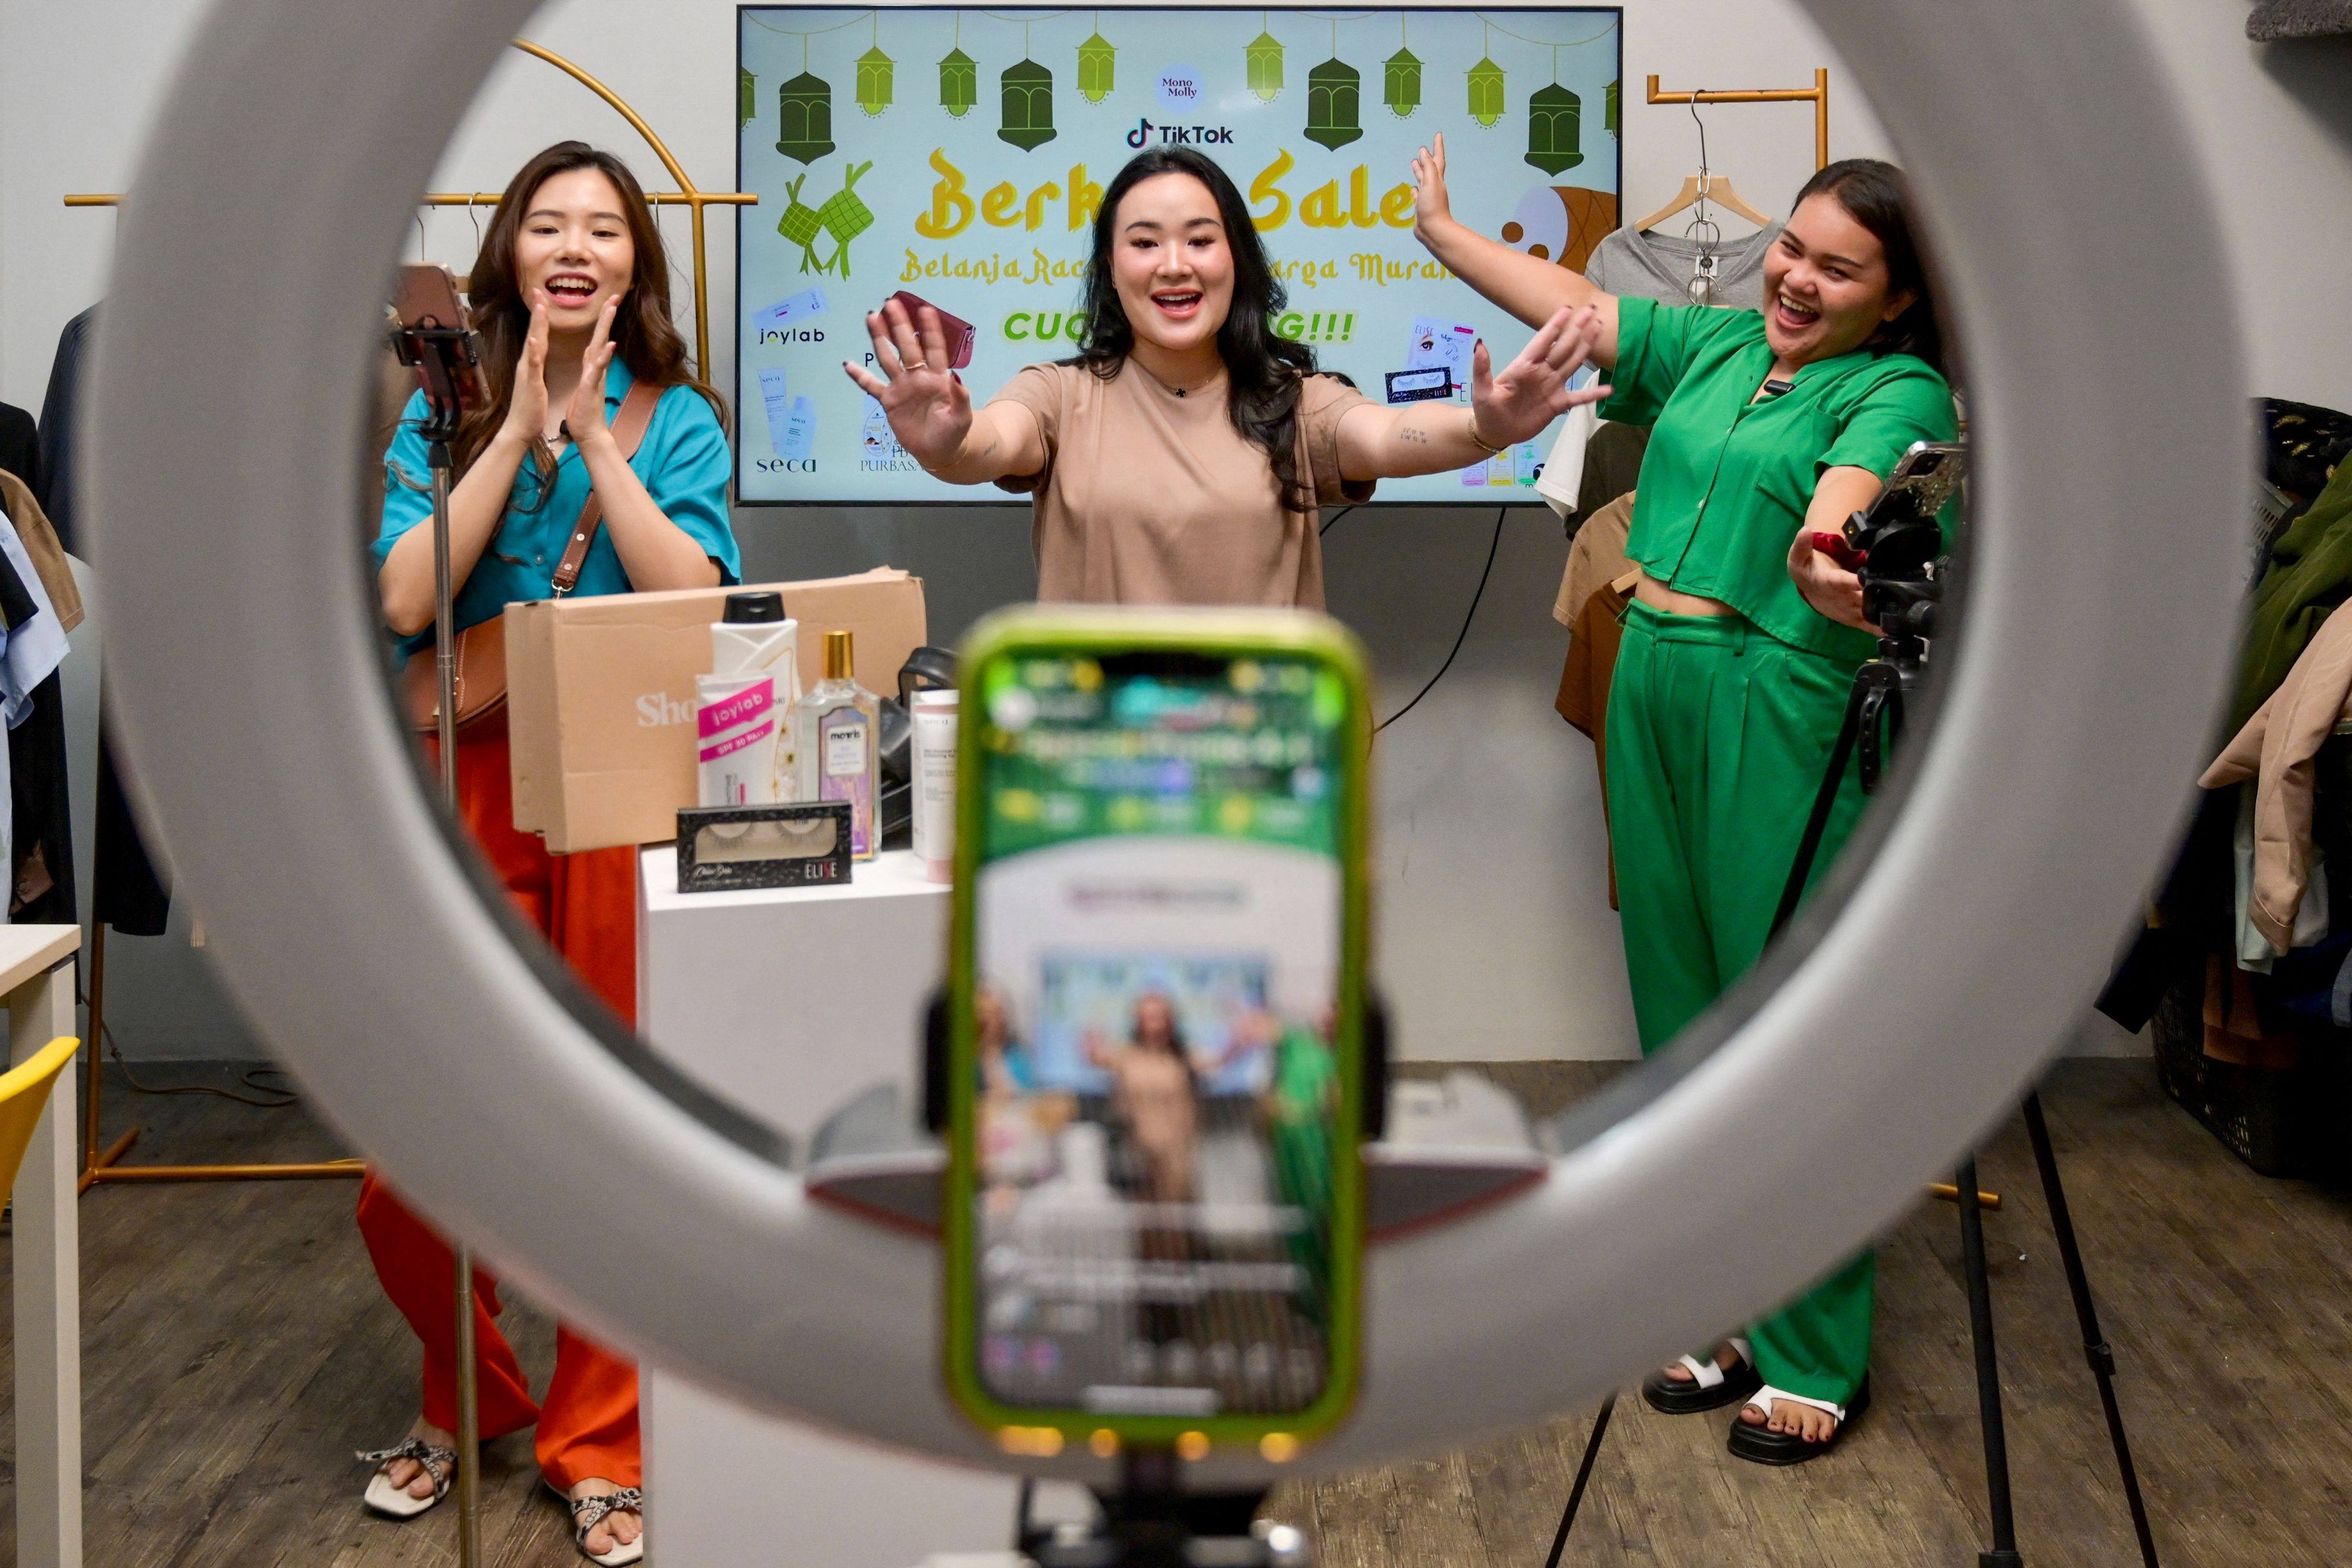 Christine Febriyanti, centre, owner of a TikTok sales channel called Monomolly, and her employees offering merchandise through a TikTok livestream at a room in Jakarta. Photo: AFP